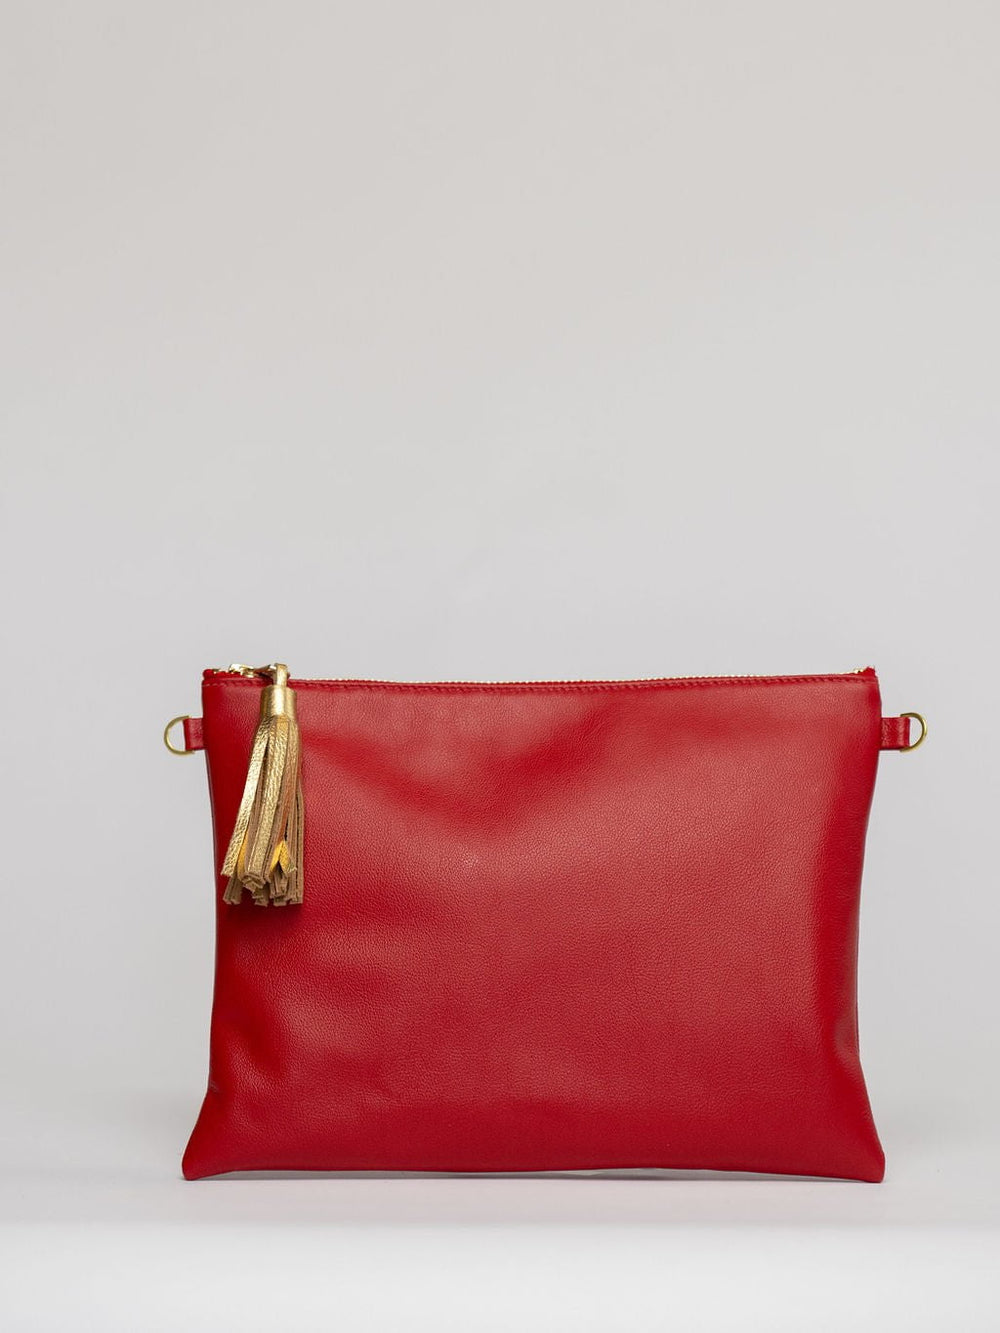 Beau & Ro Clutch + Crossbody Red / One Size The Sconset Clutch + Crossbody Bag | Red